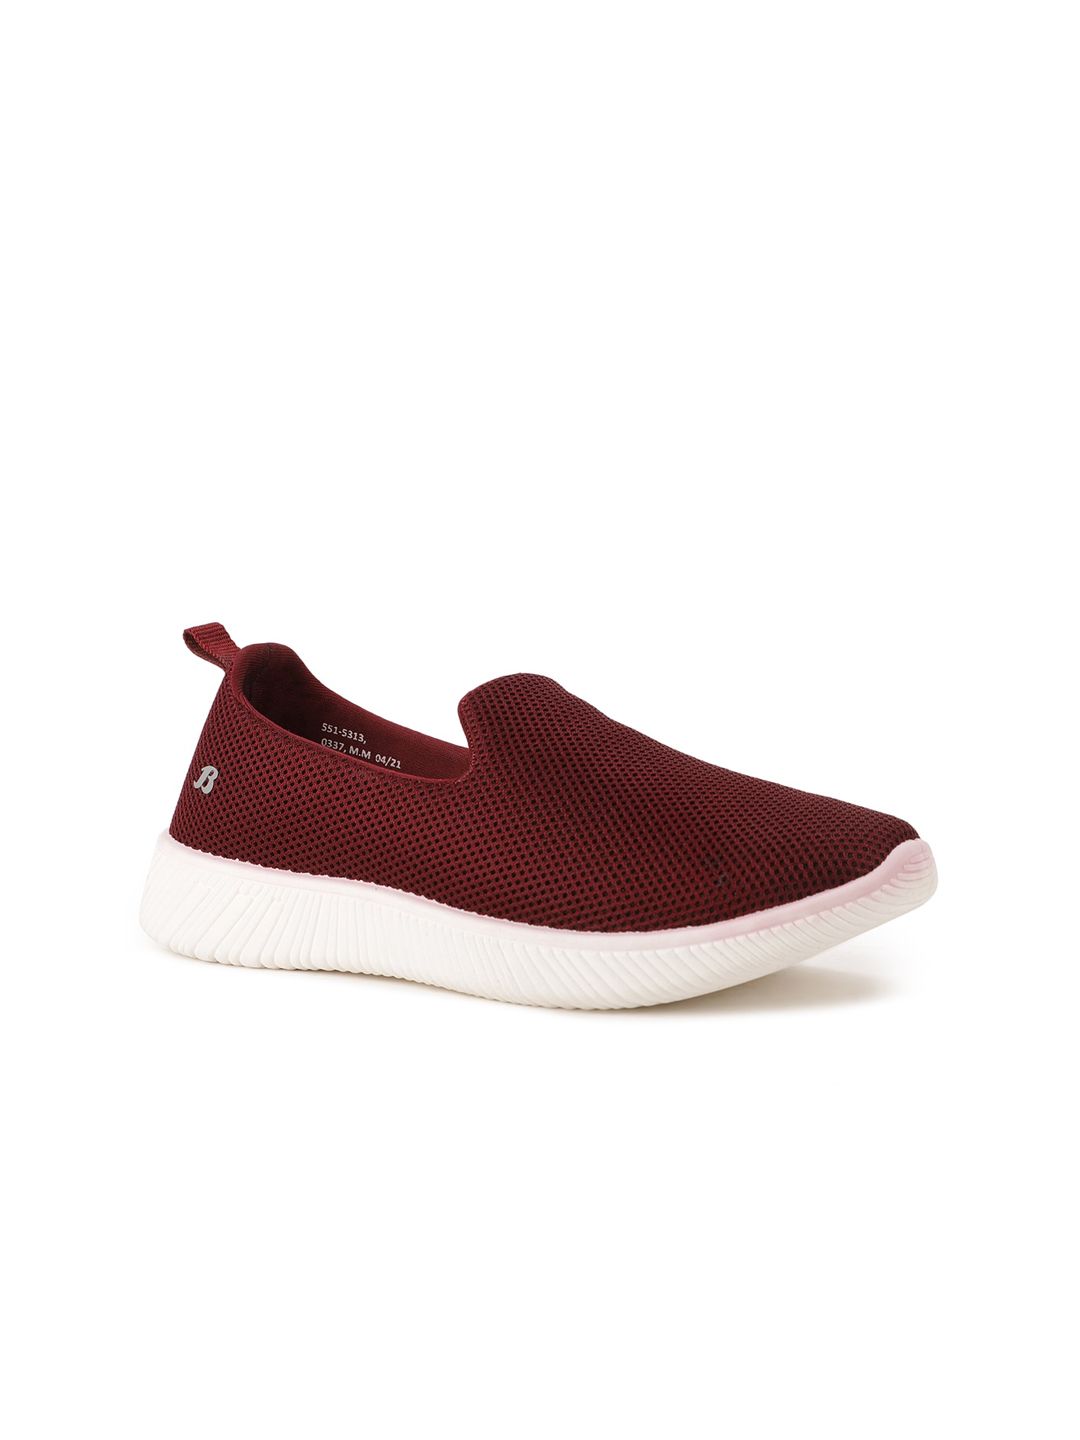 Bata Women Red Woven Design PU Slip-On Sneakers Price in India